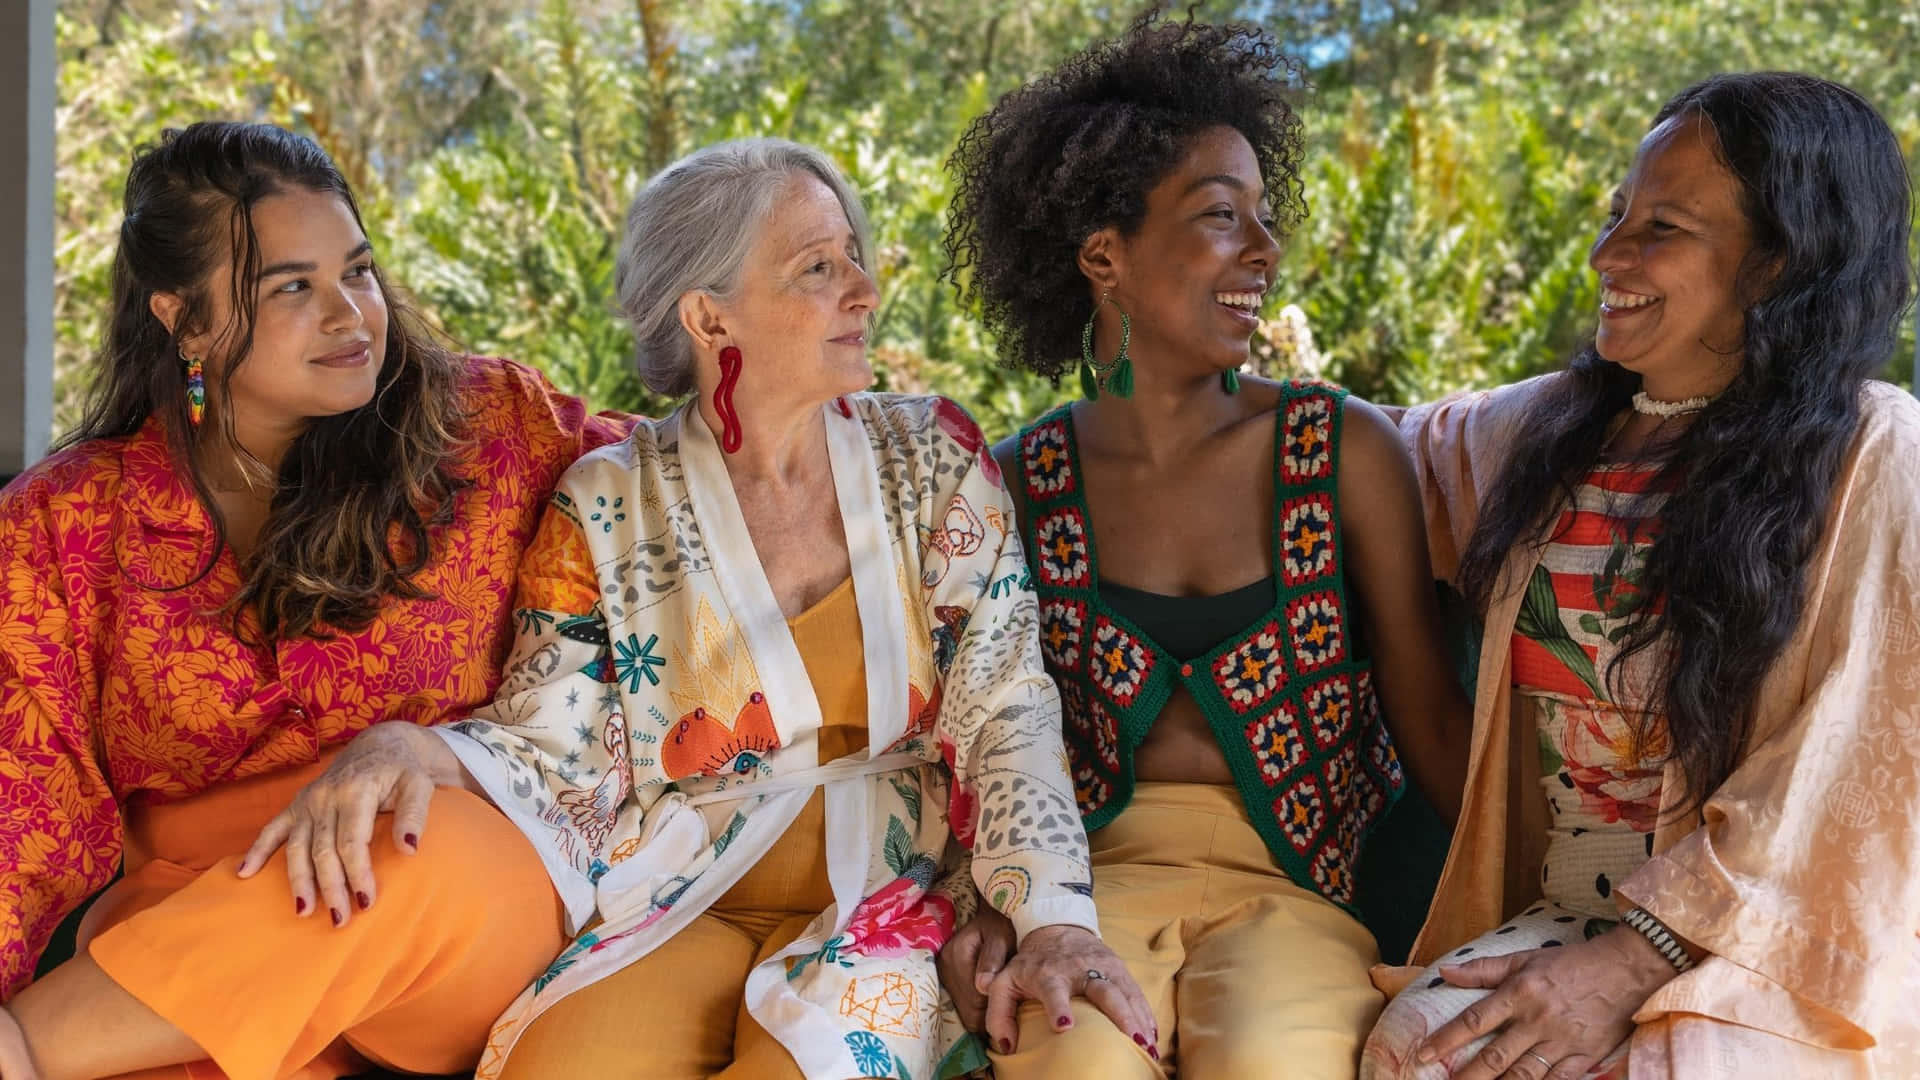 Four Women Sitting On A Bench In A Tropical Setting